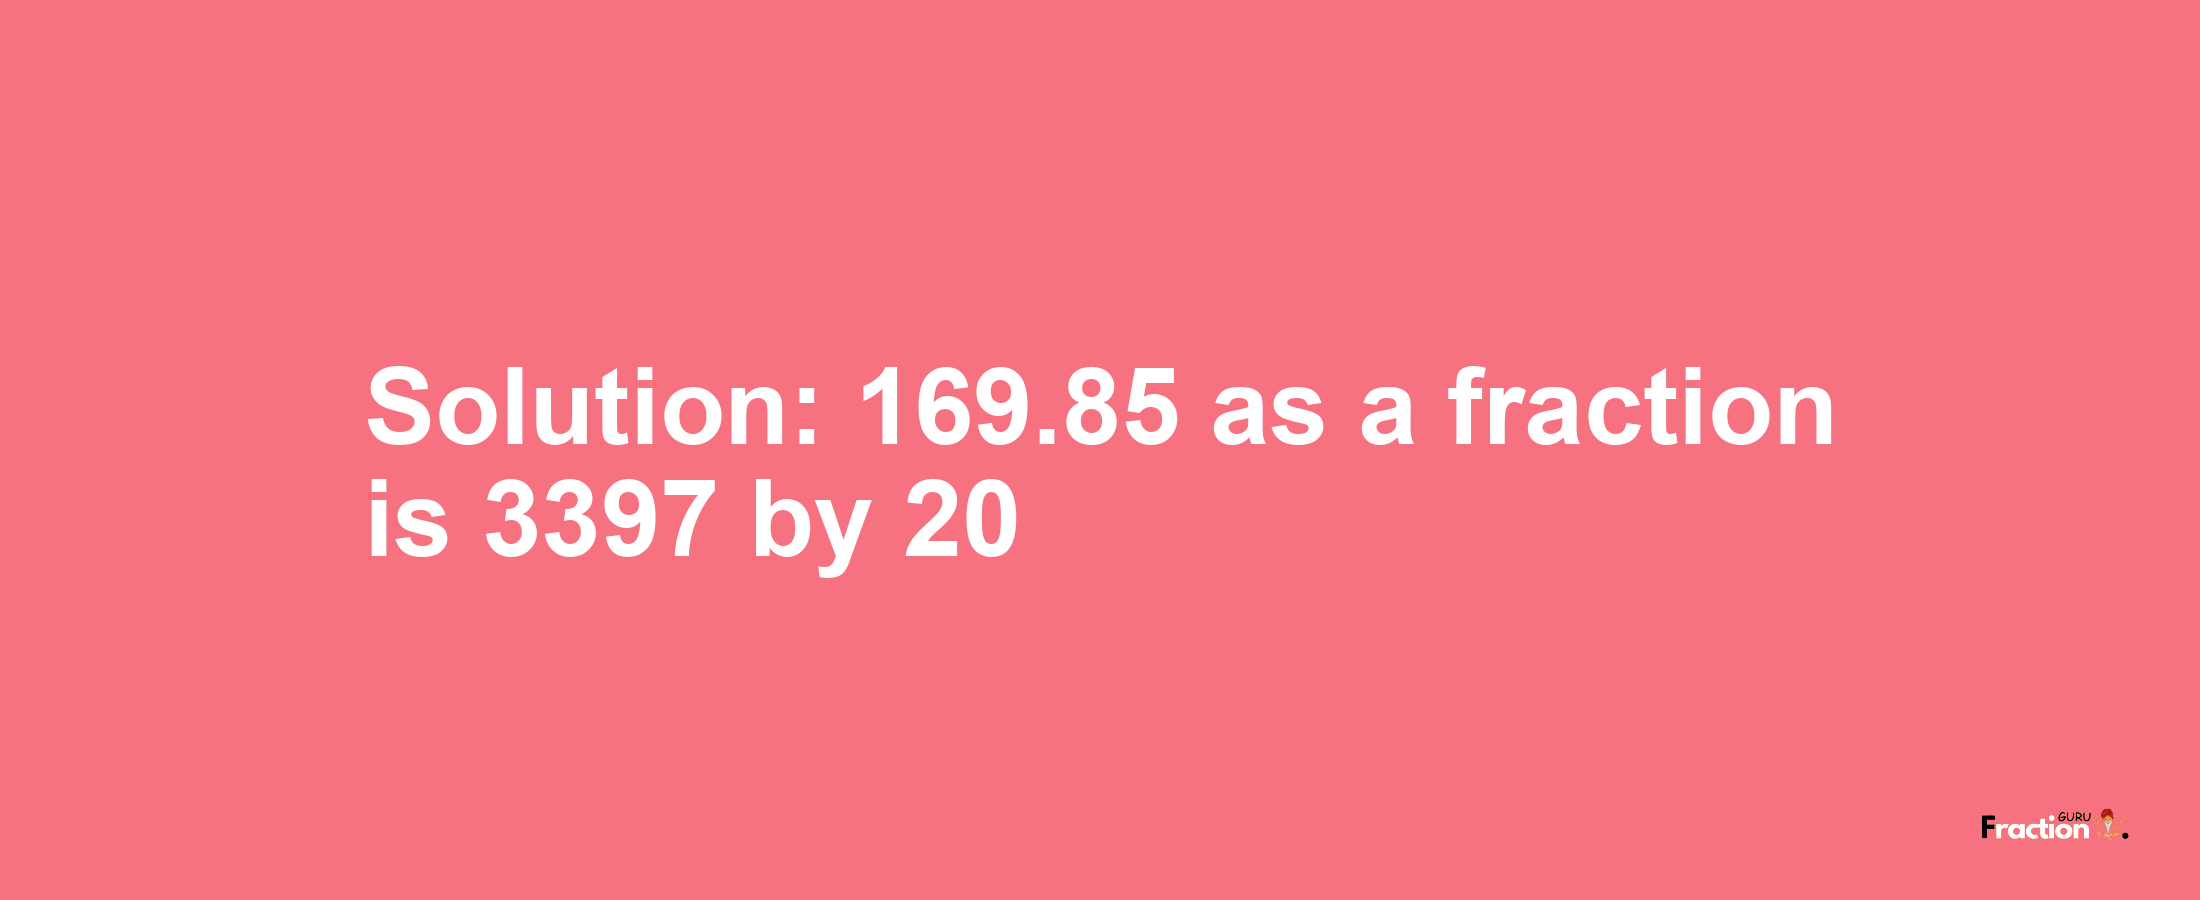 Solution:169.85 as a fraction is 3397/20